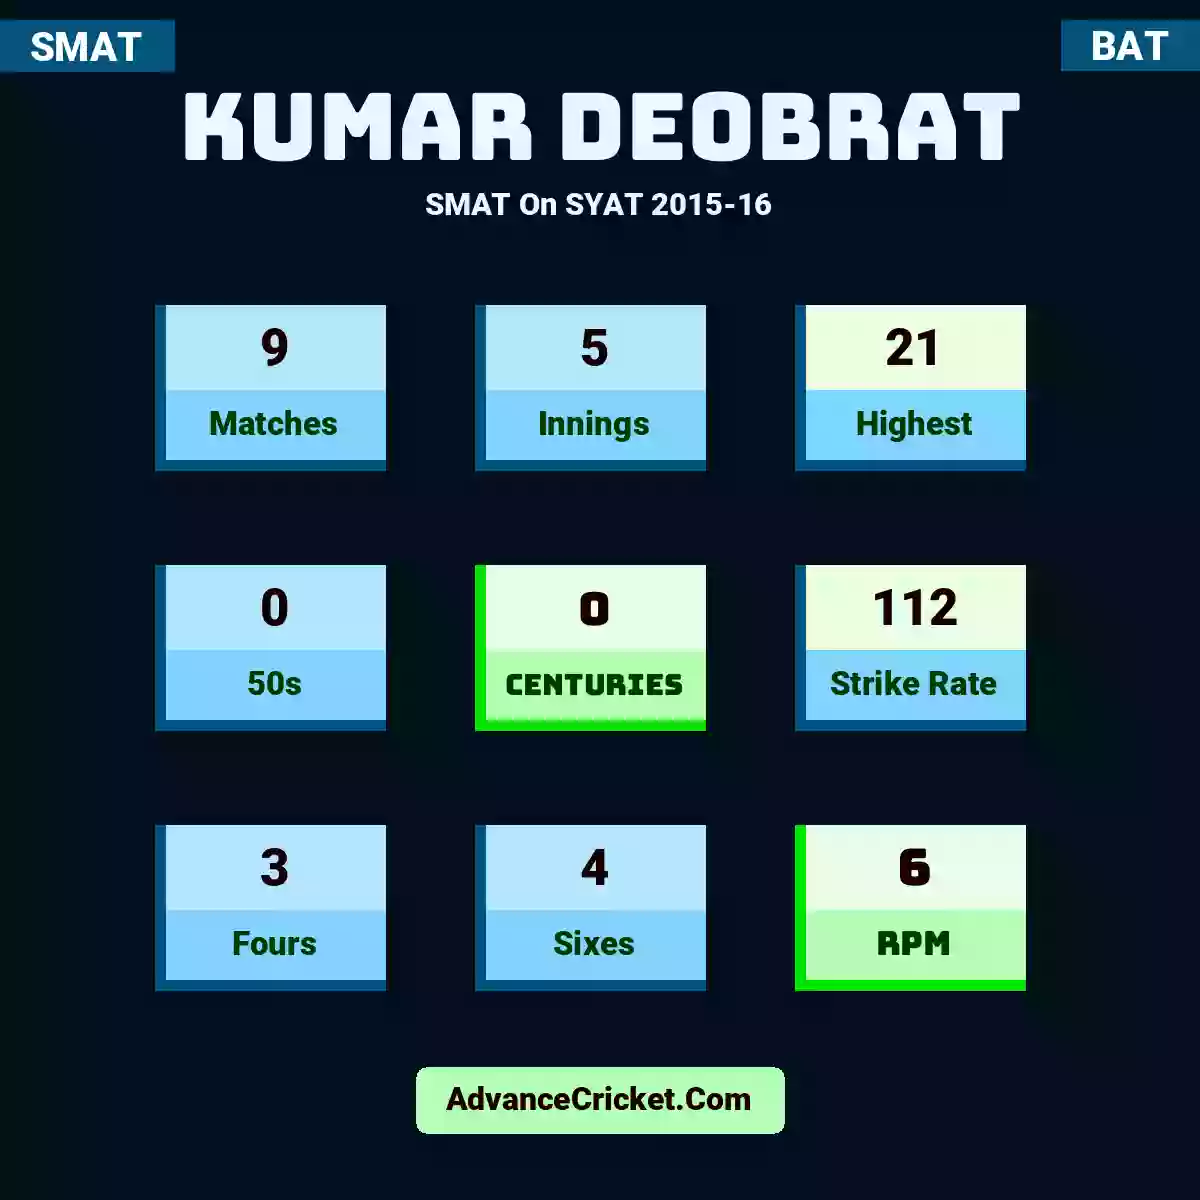 Kumar Deobrat SMAT  On SYAT 2015-16, Kumar Deobrat played 9 matches, scored 21 runs as highest, 0 half-centuries, and 0 centuries, with a strike rate of 112. K.Deobrat hit 3 fours and 4 sixes, with an RPM of 6.